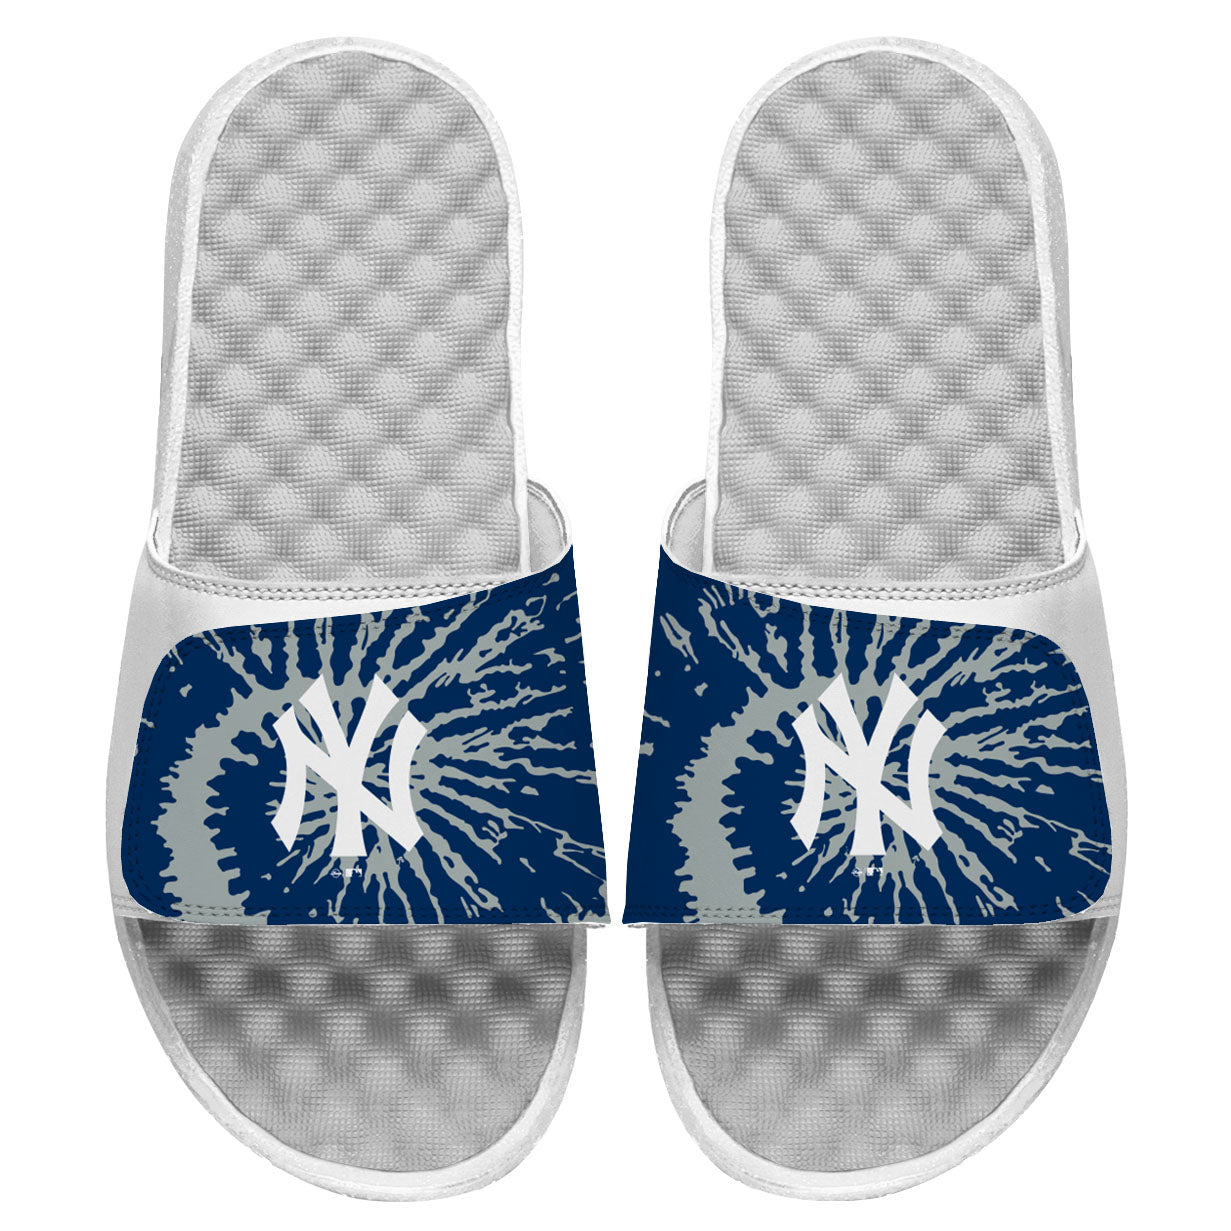 ISlides Official - New York Yankees 9 / Great White Slides - Sandals - Slippers